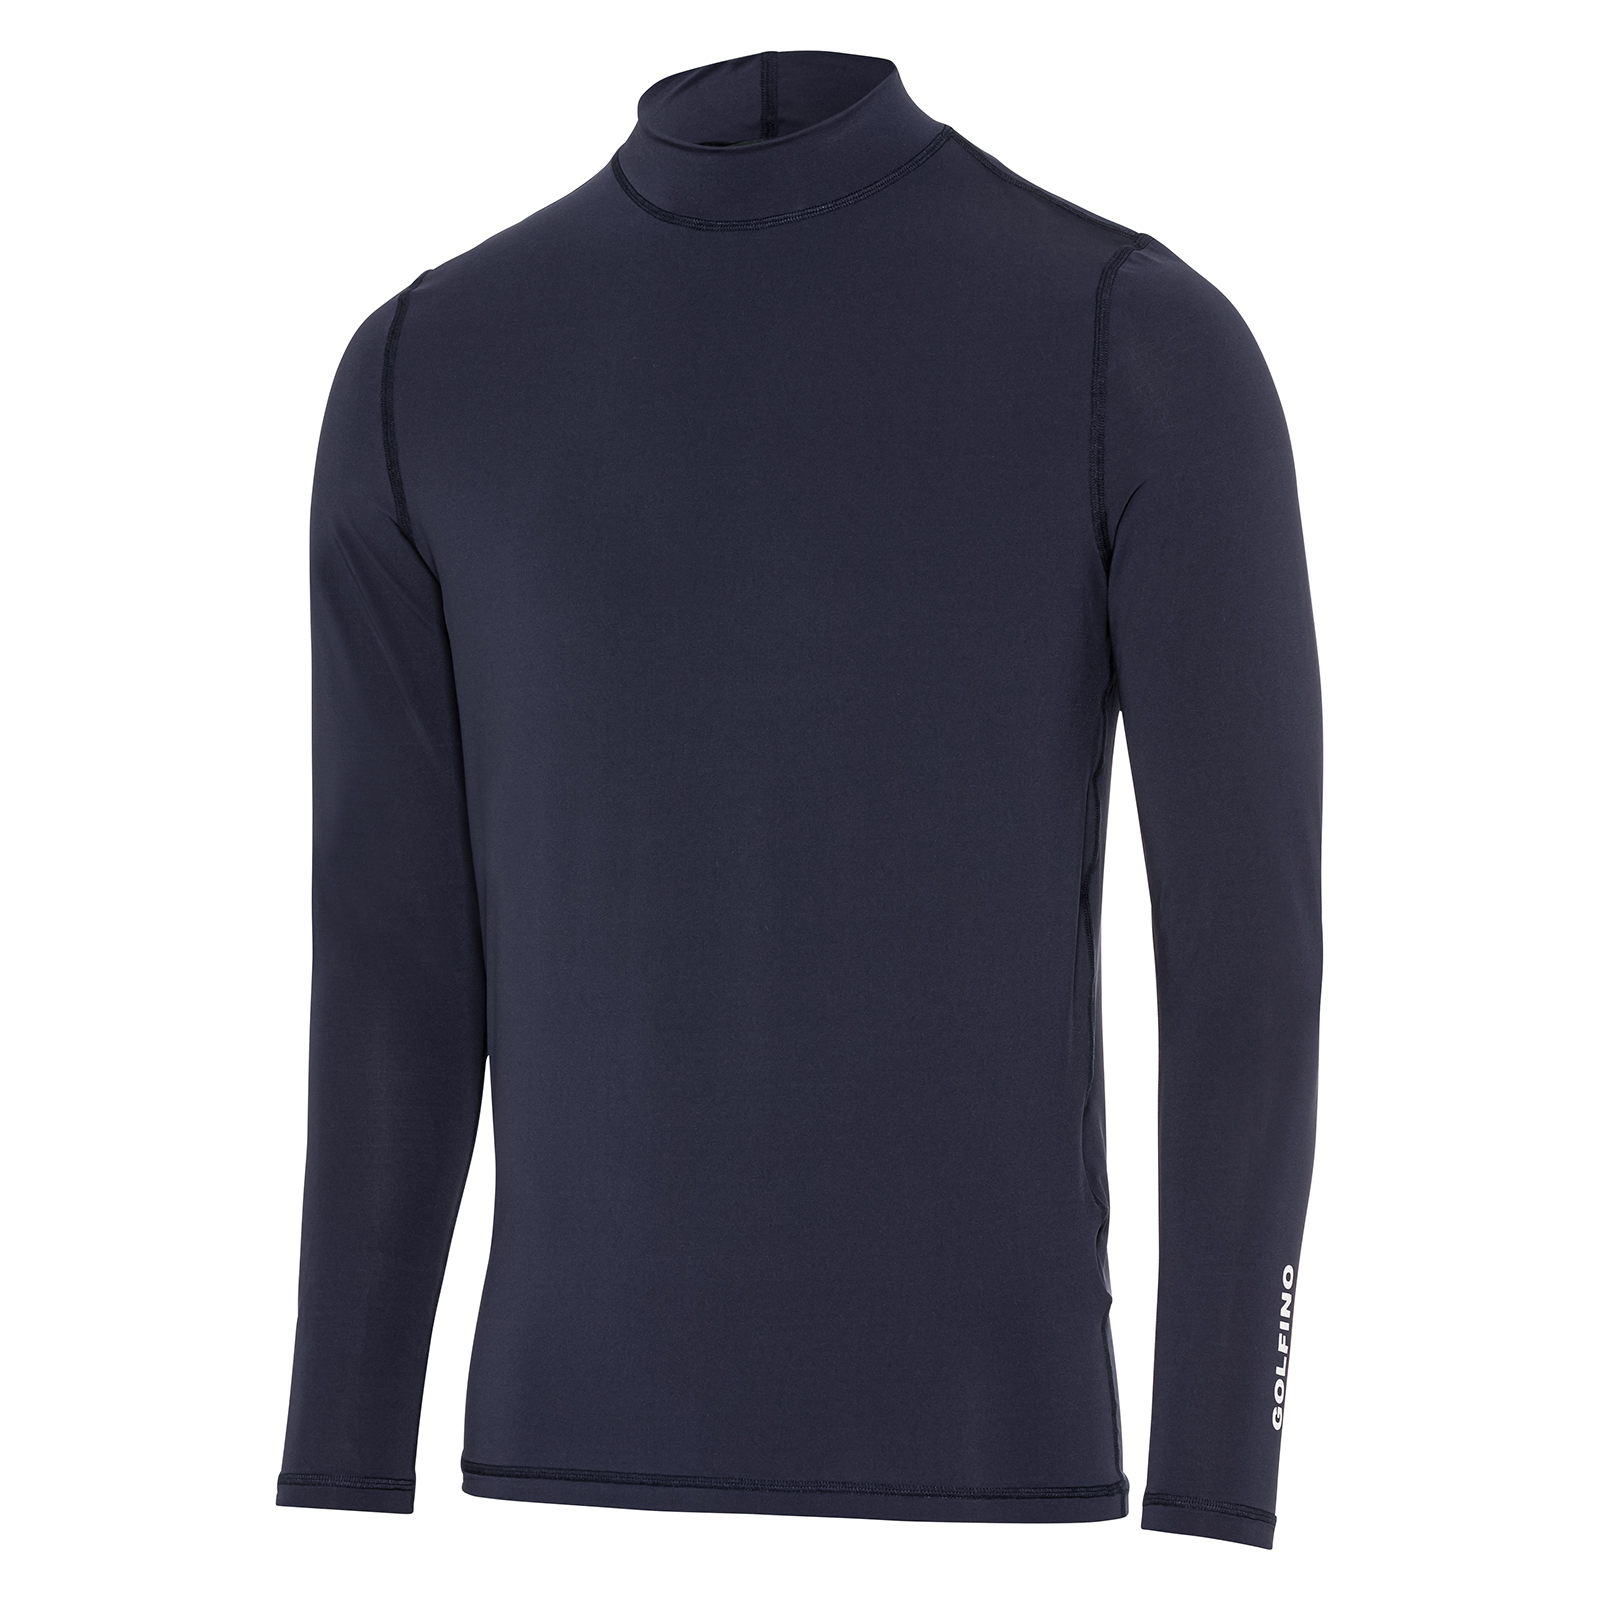 Men's long-sleeved shirt with ultraviolet protection factor